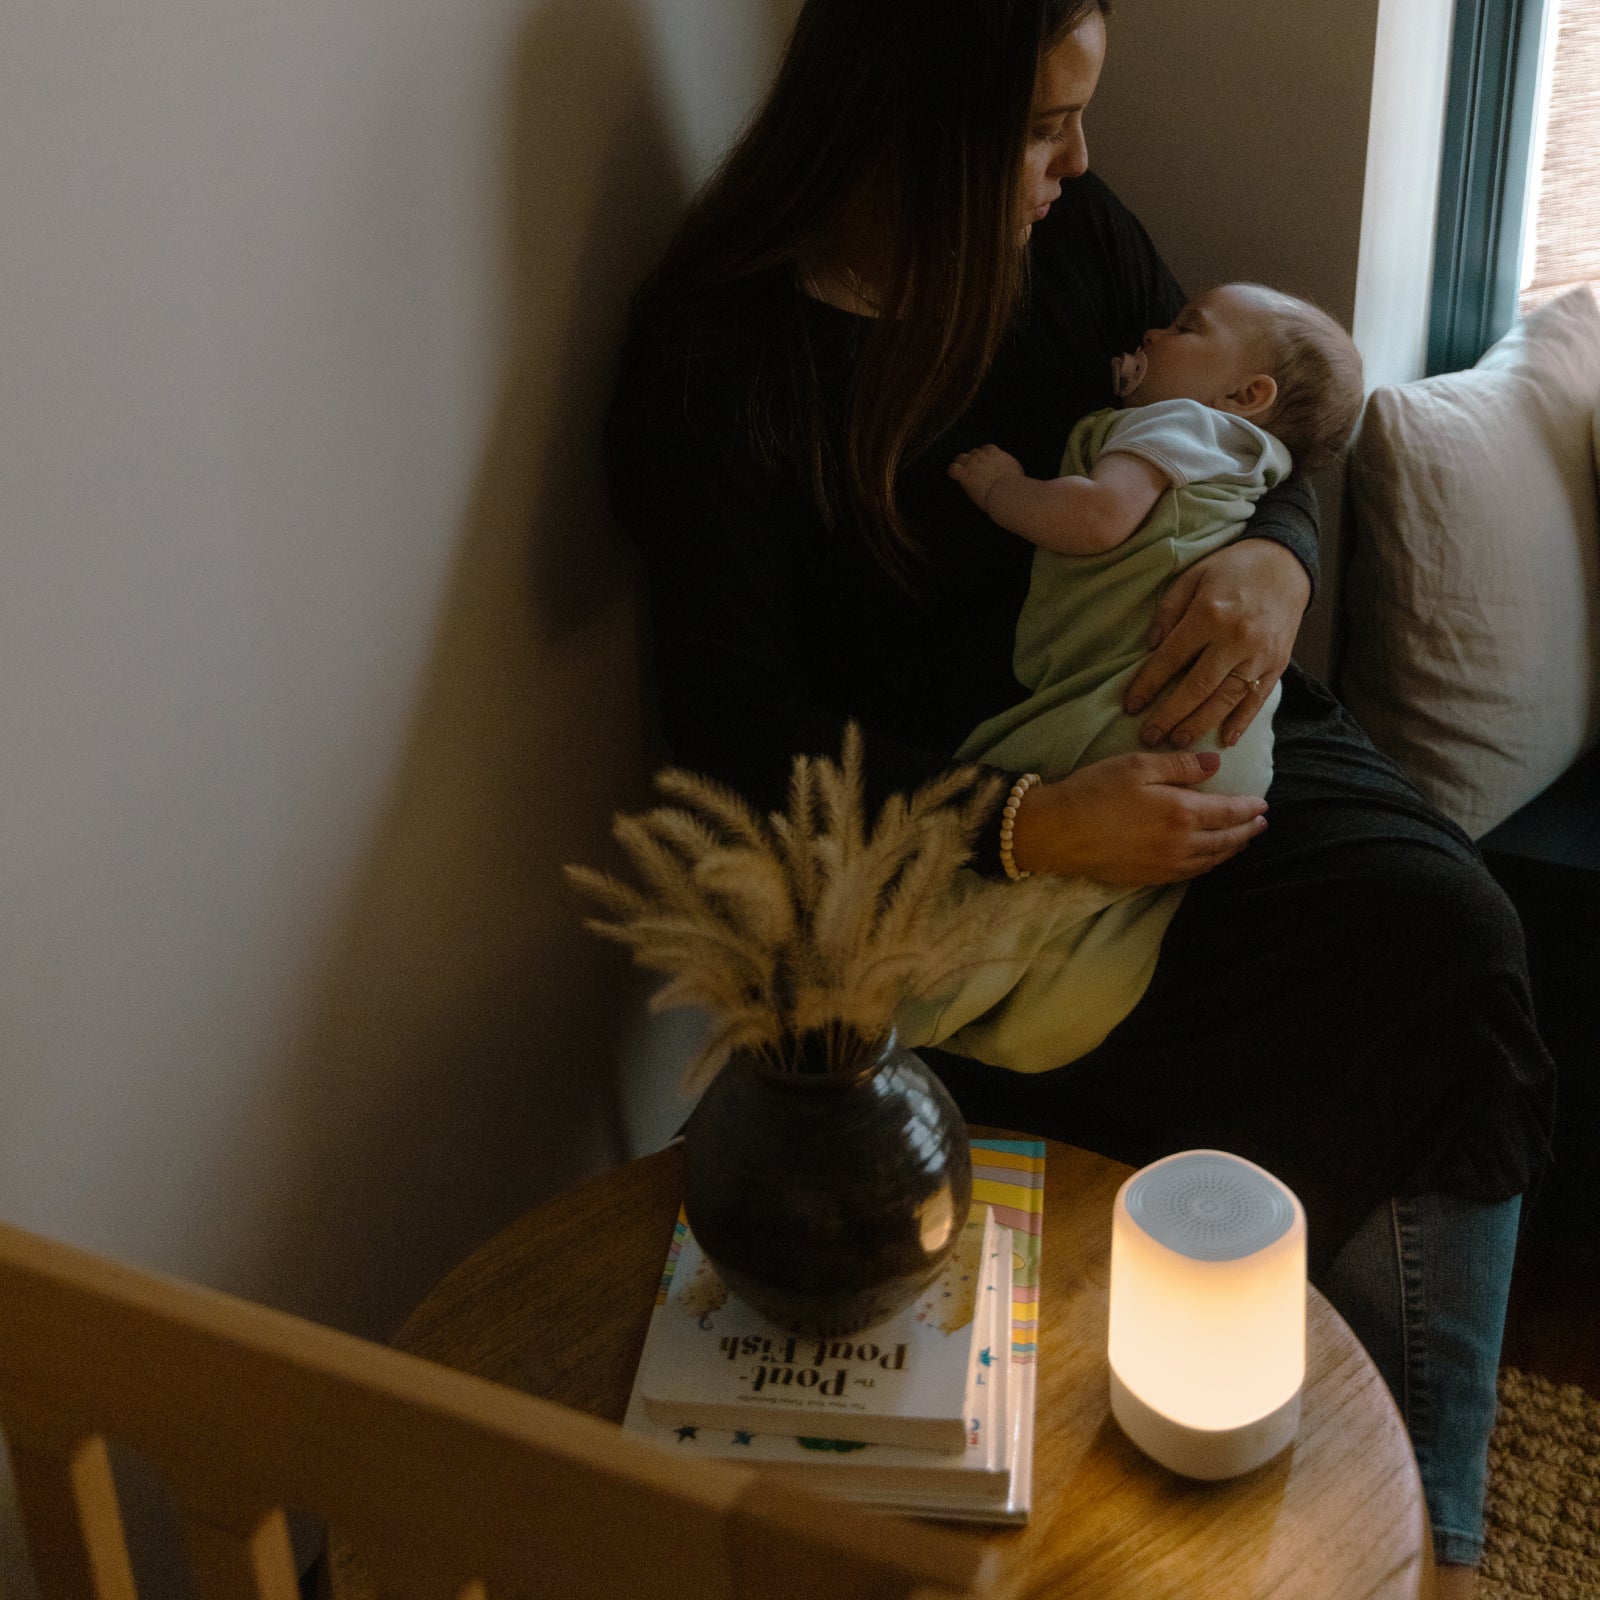 mom holding sleeping baby with nanit sound + light on table